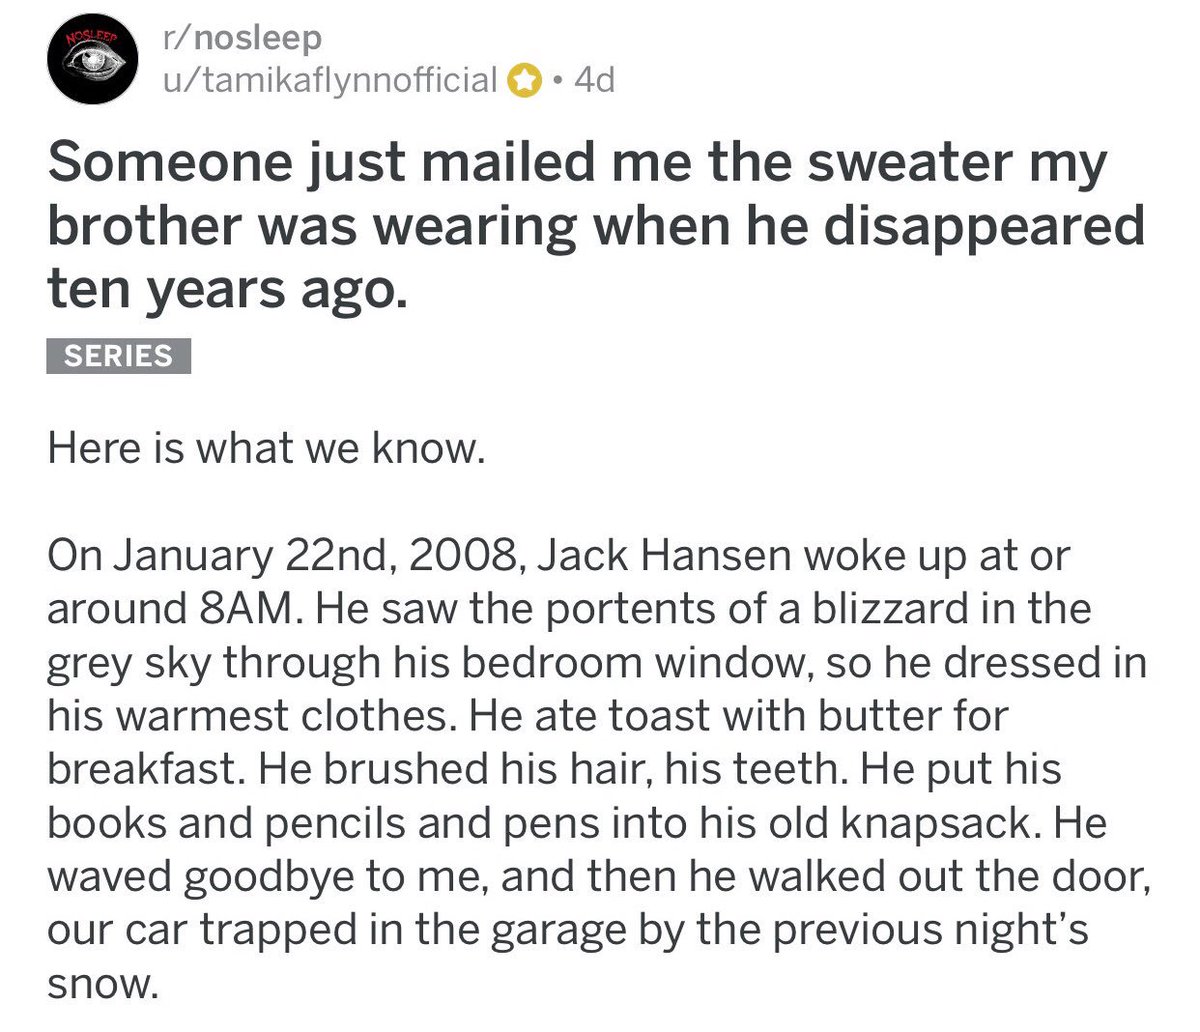 ↳ Someone just mailed me the sweater my brother was wearing when he disappeared ten years ago.{ https://www.reddit.com/r/nosleep/comments/7s3r1f/someone_just_mailed_me_the_sweater_my_brother_was/}